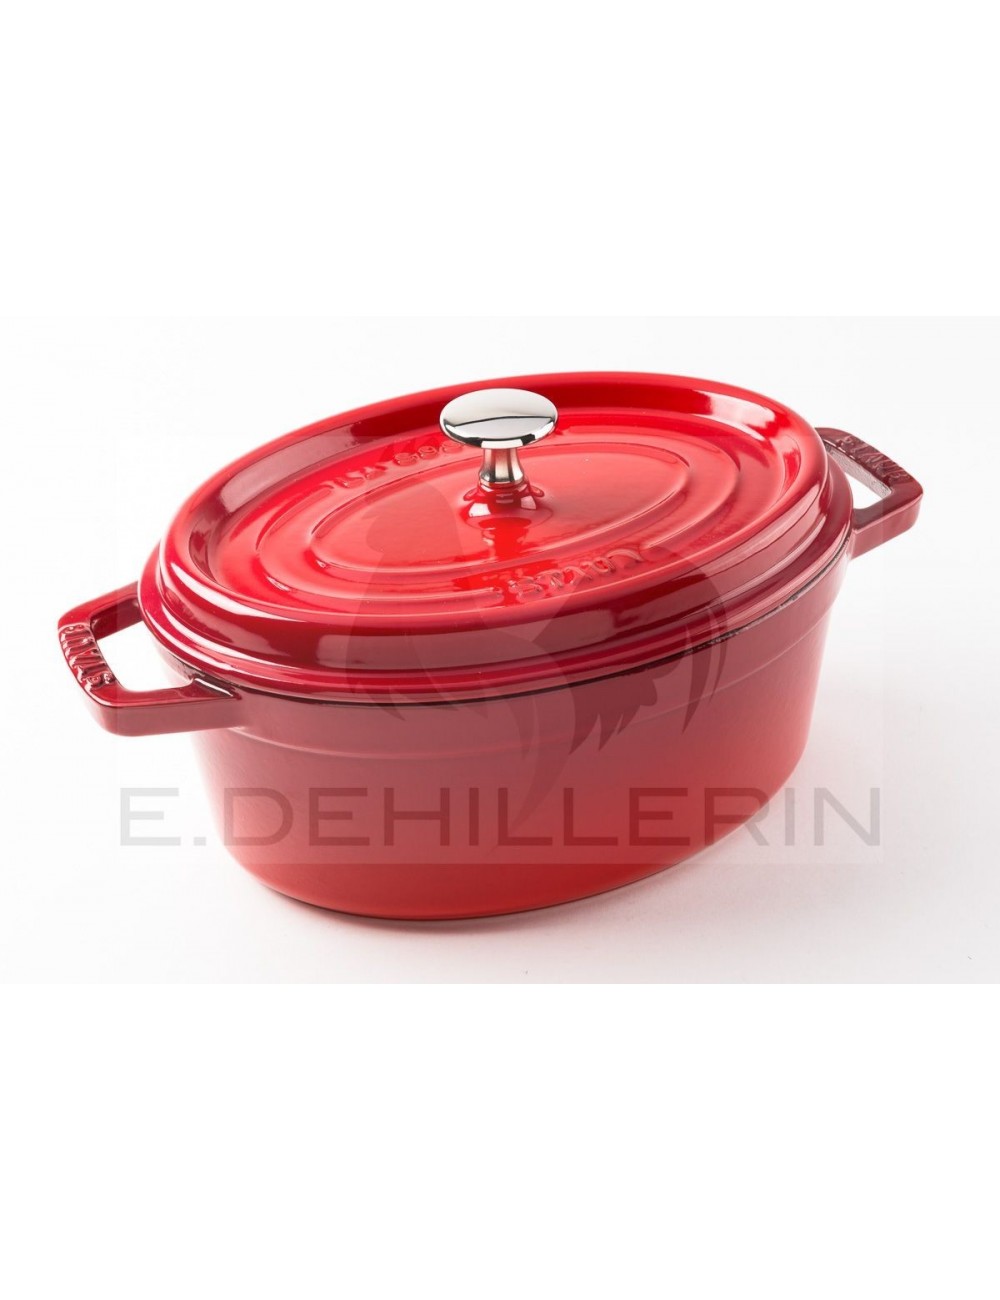 OVAL COCOTTE IN CAST IRON RED-STAUB-COOKING UTENSIL Choix longueur (cm) 23